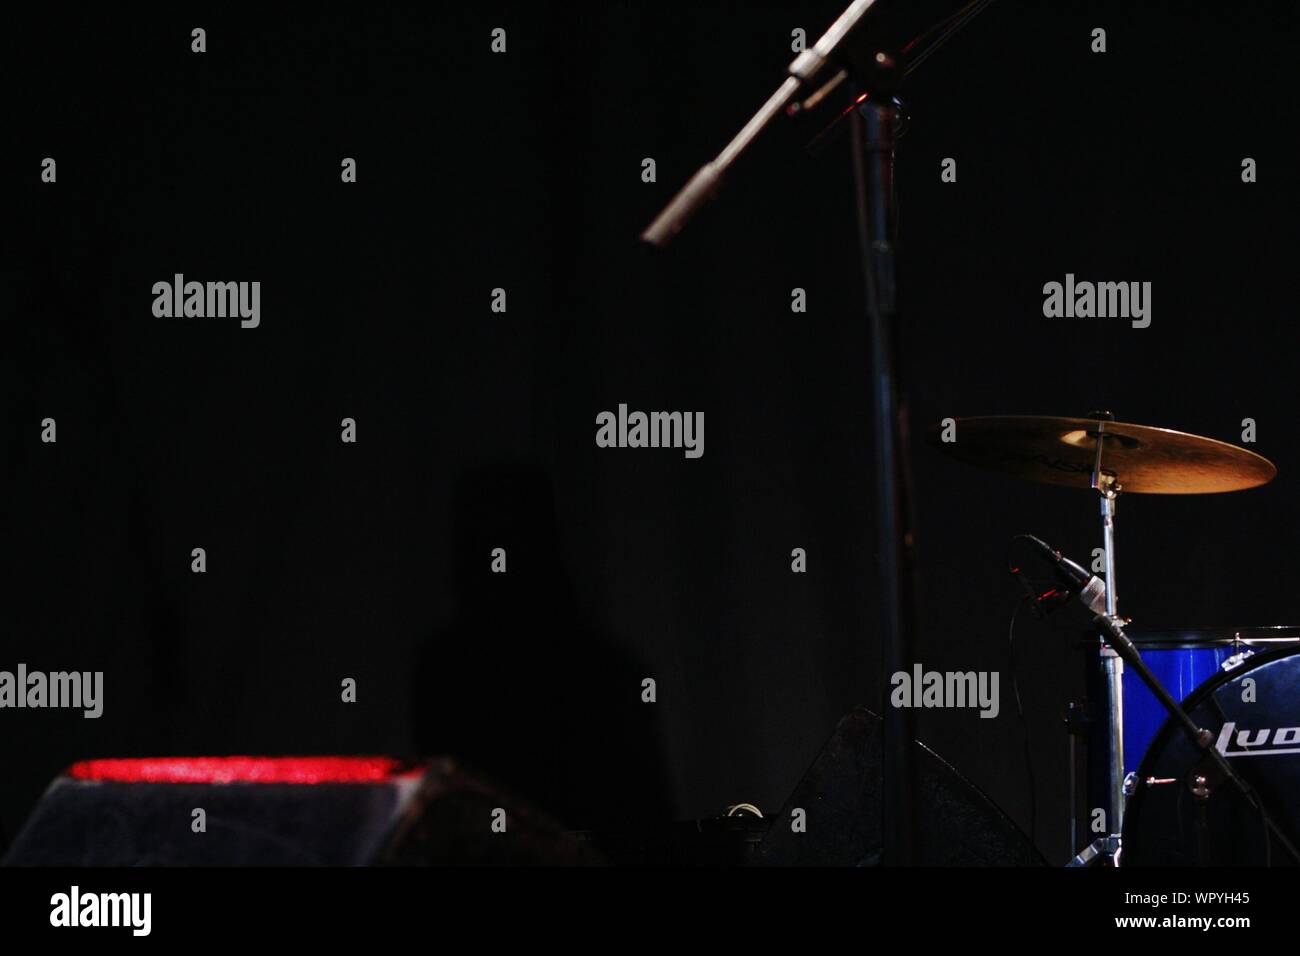 Microphone Stand On Illuminated Stage Stock Photo